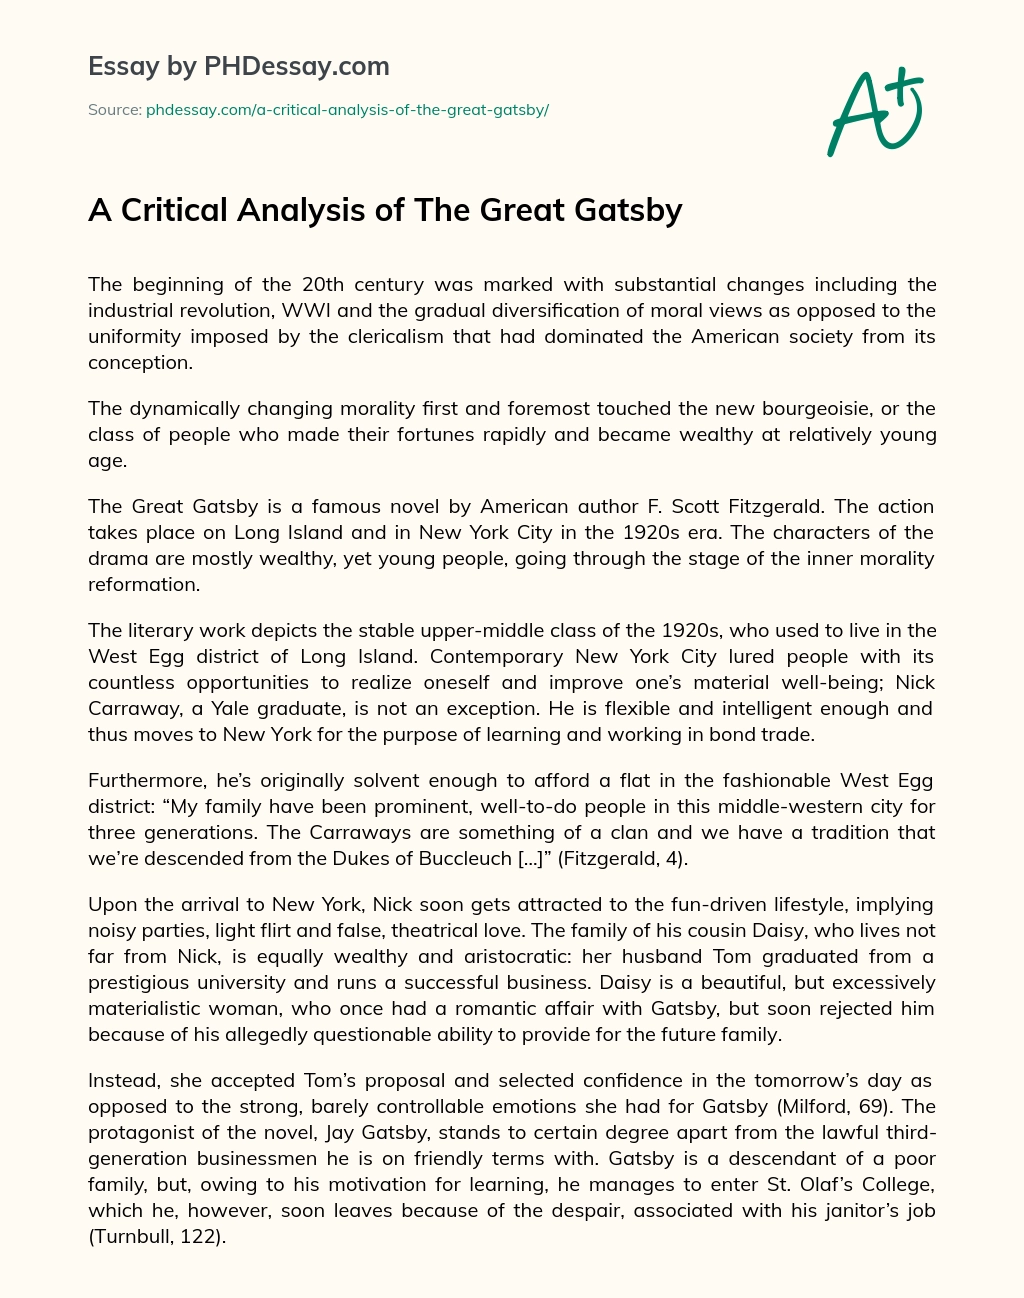 A Critical Analysis of The Great Gatsby essay